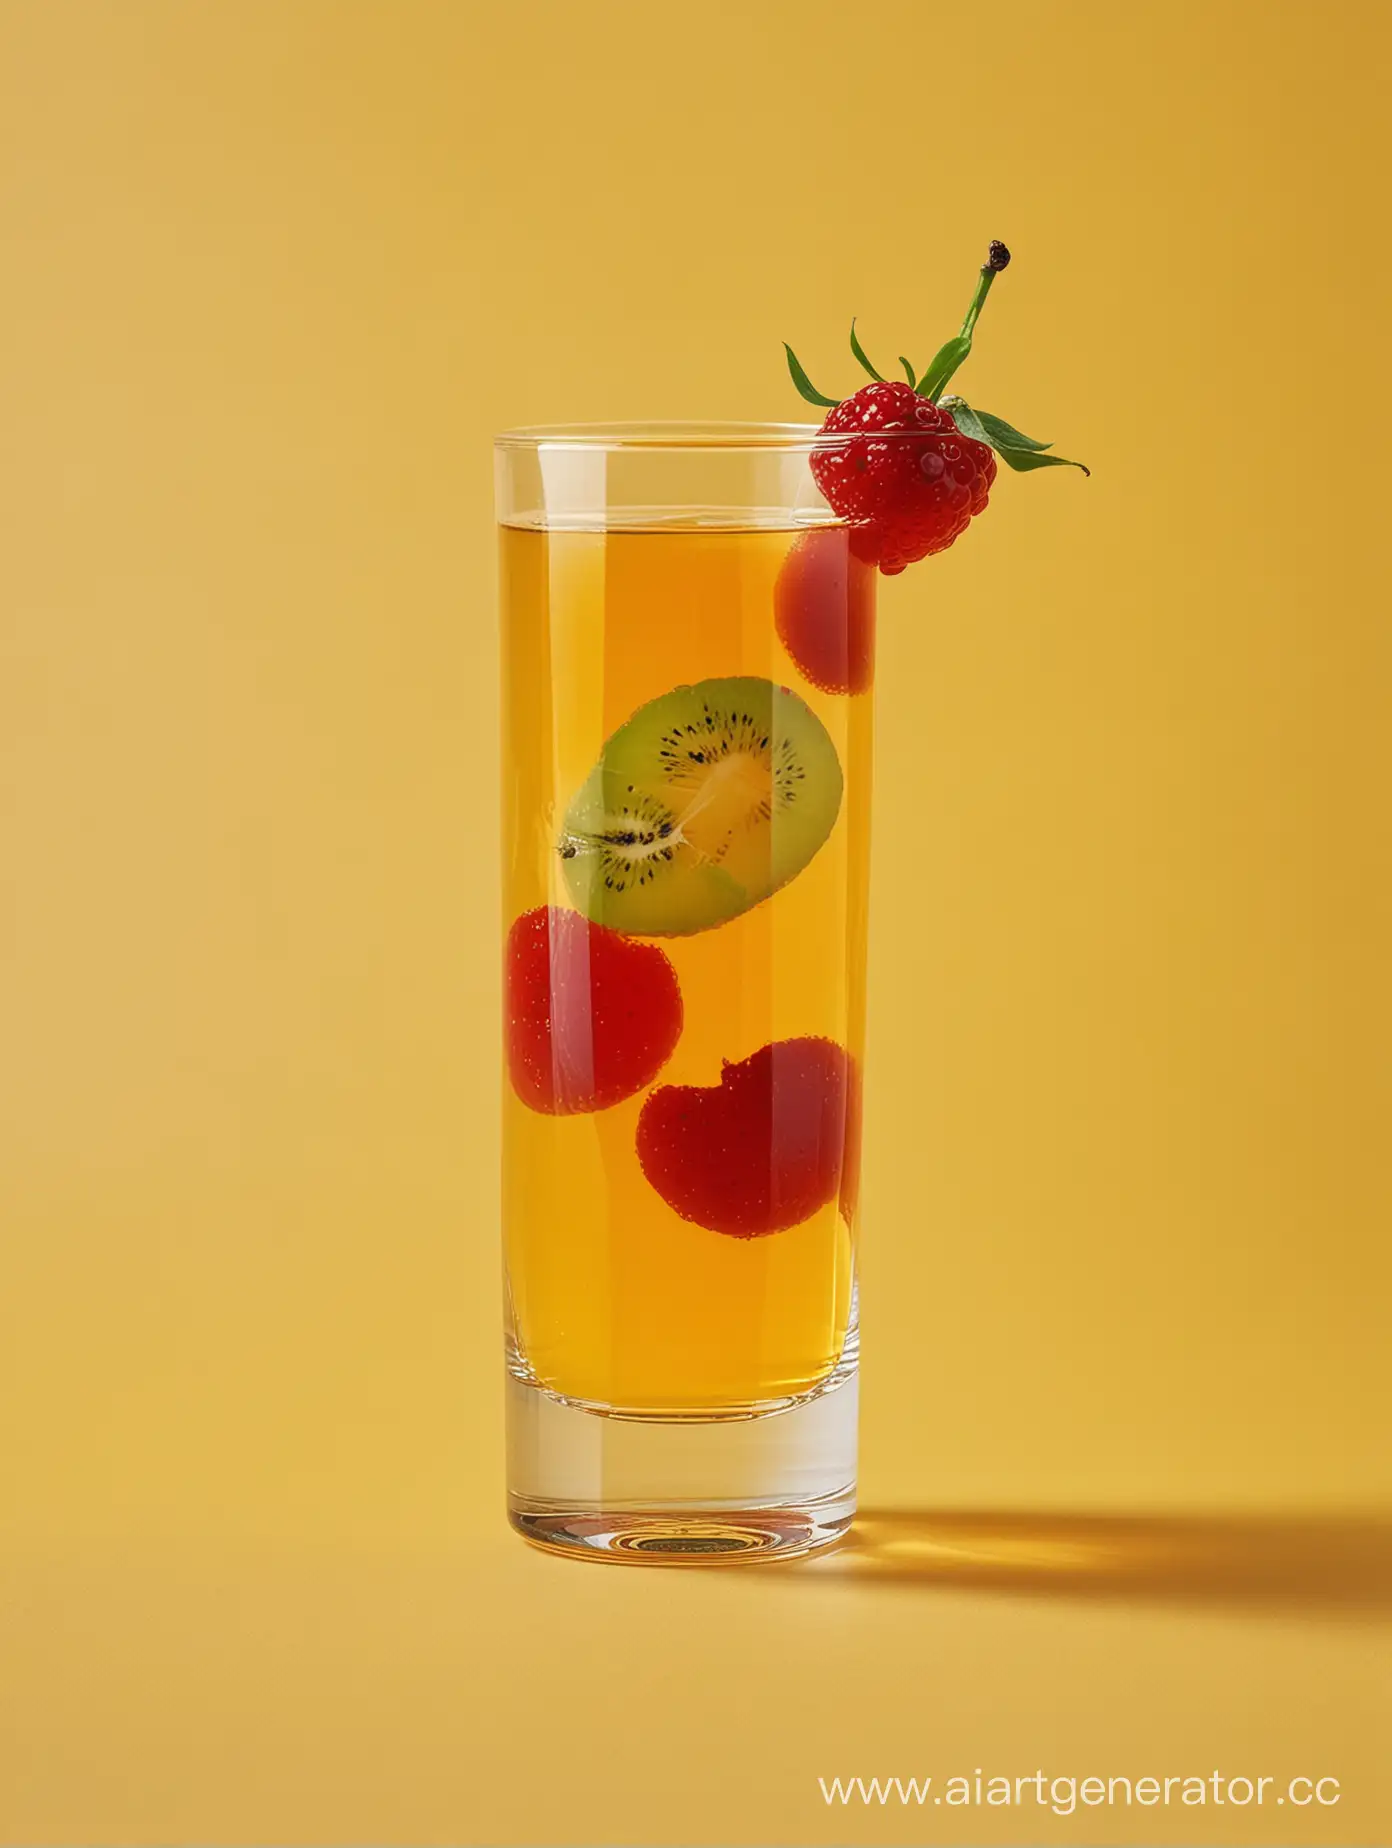 akebi-fruit with juice classic glass on YELLOW GOLD background